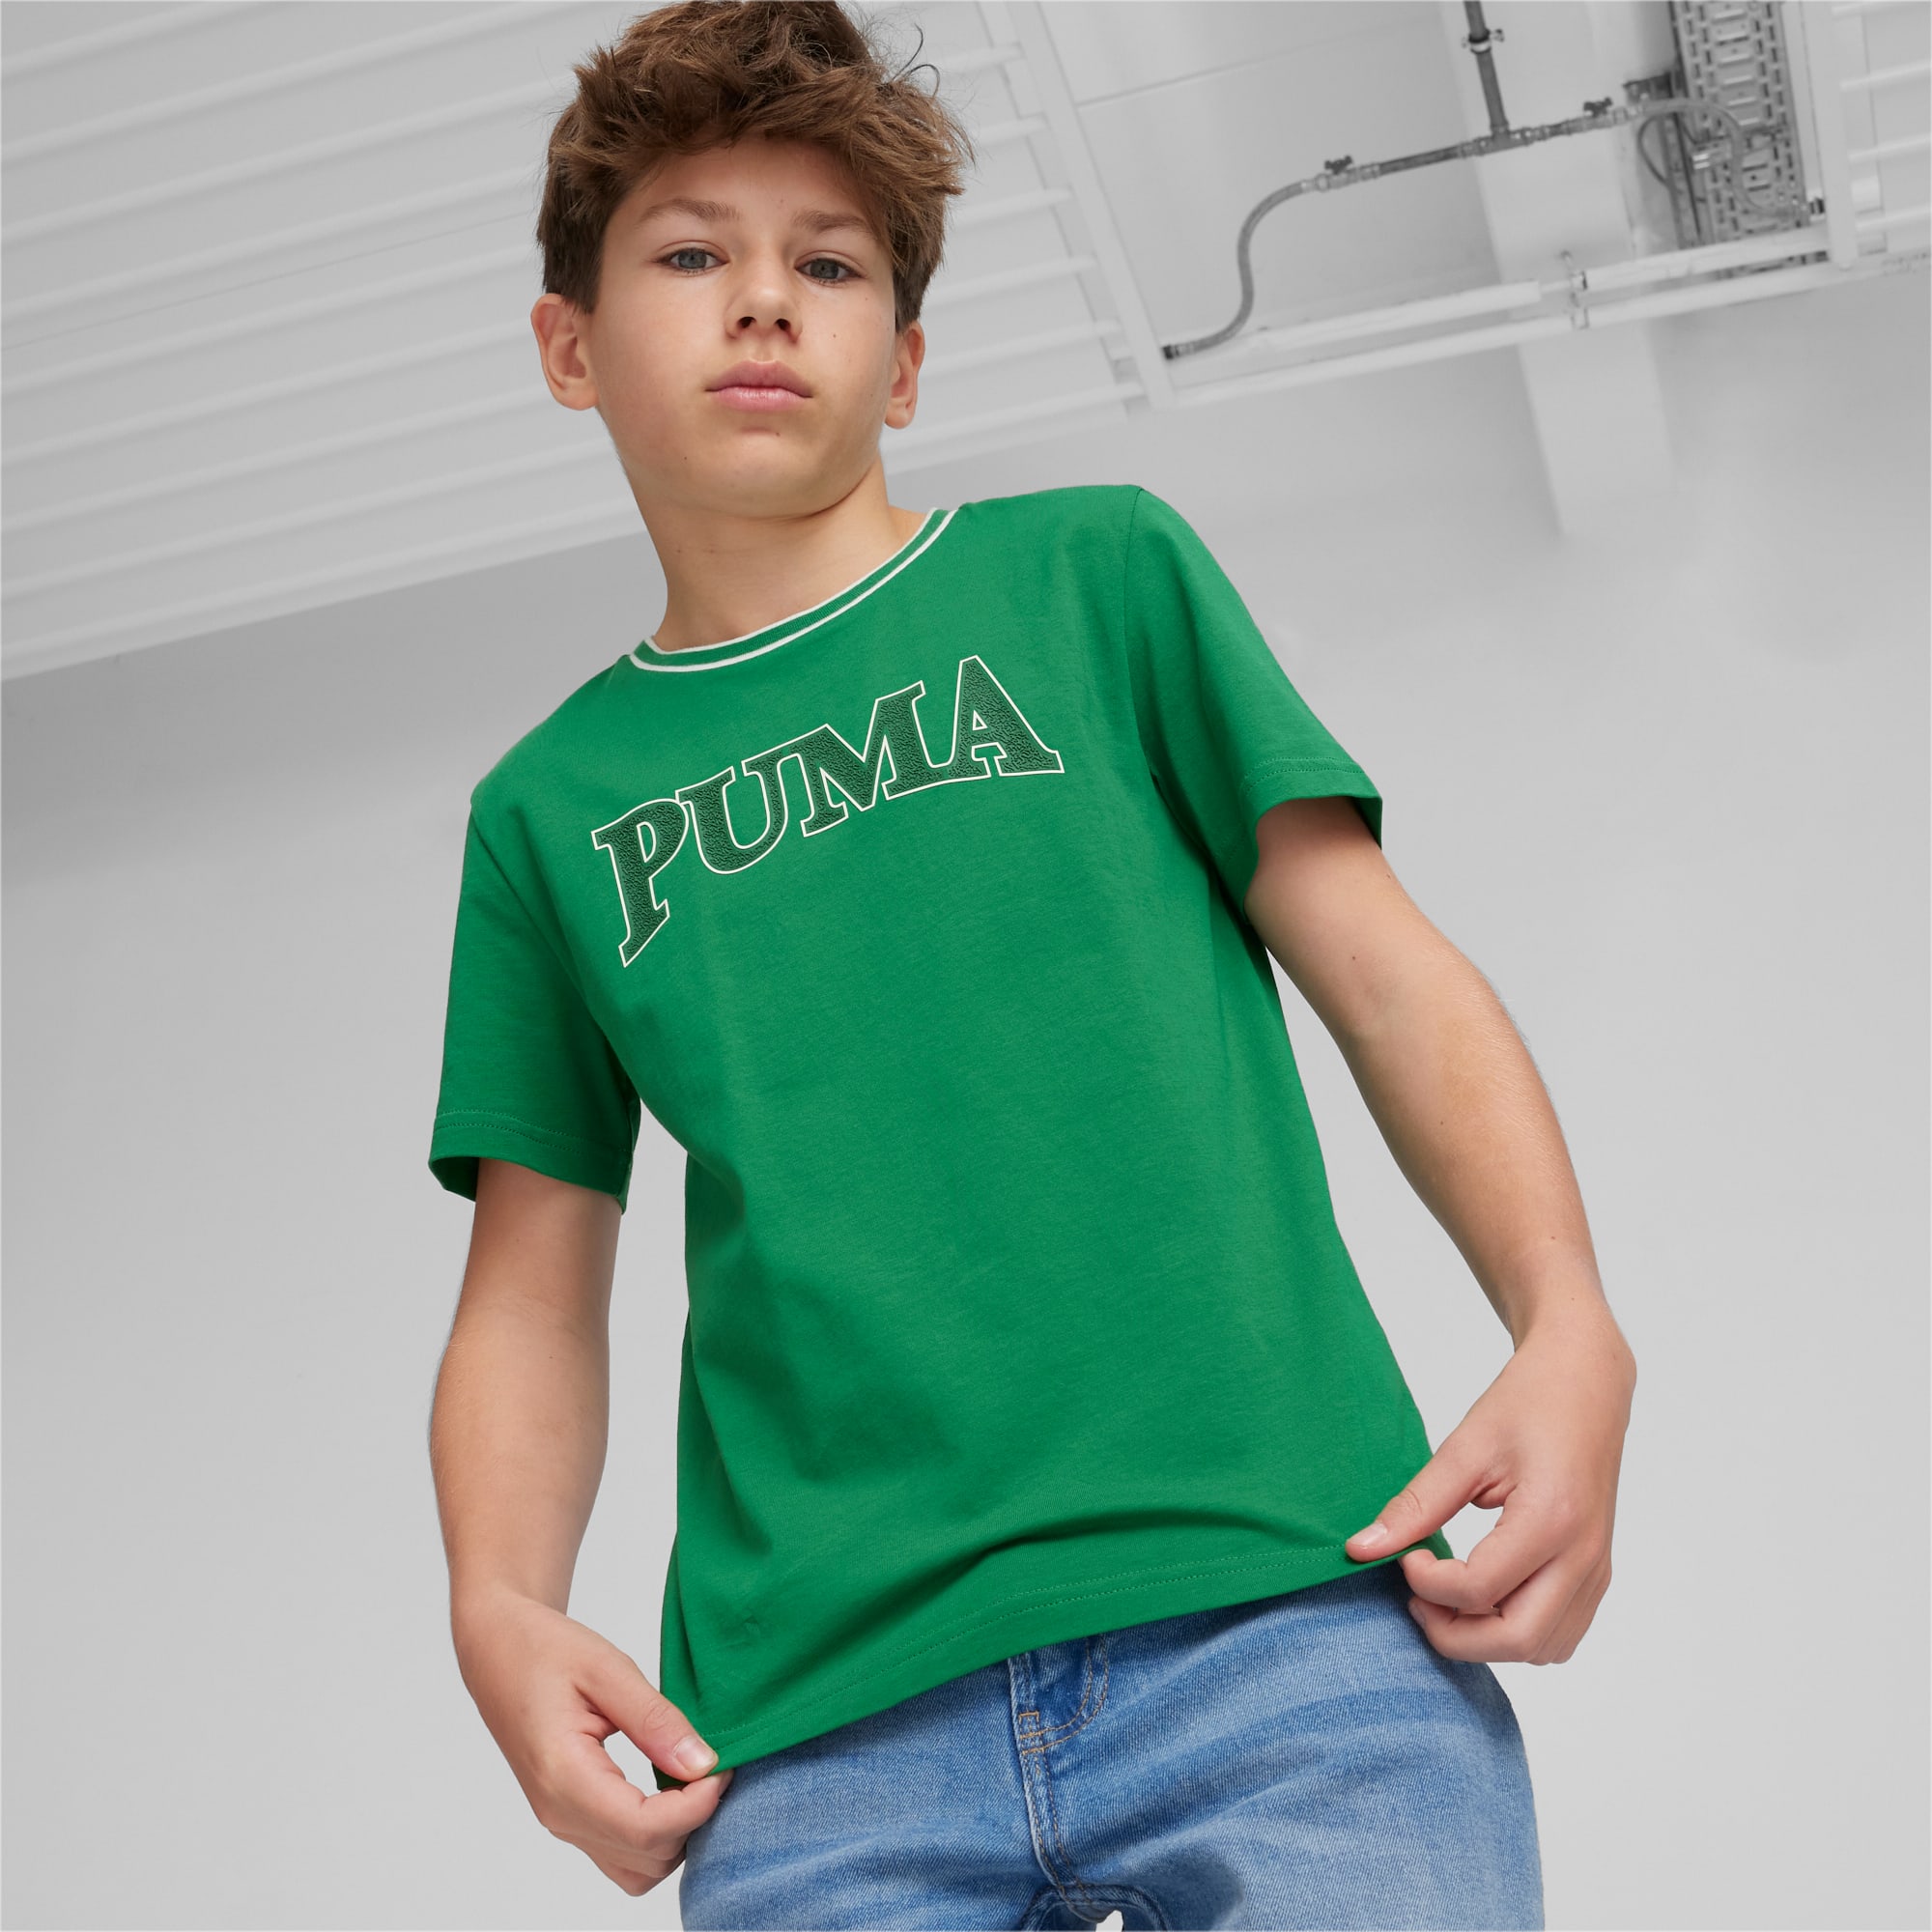 PUMA Squad Youth T-Shirt, Archive Green, Size 128, Clothing